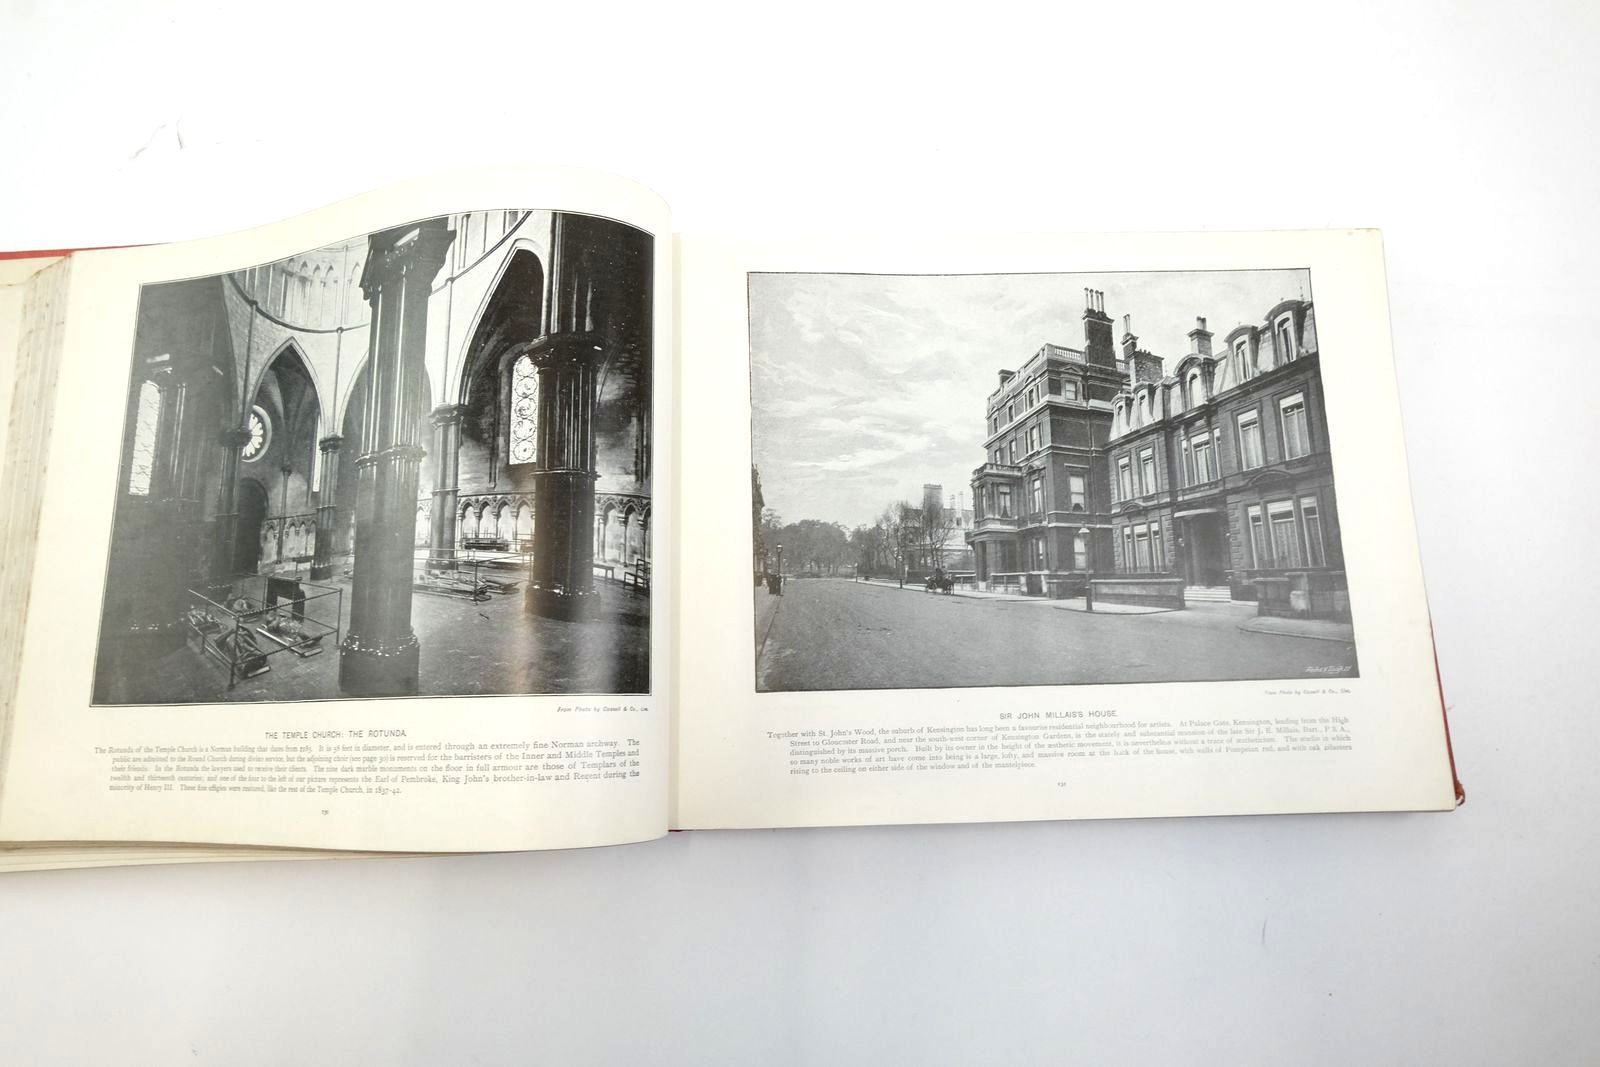 Photo of THE QUEEN'S LONDON published by Cassell & Company Limited (STOCK CODE: 2137886)  for sale by Stella & Rose's Books